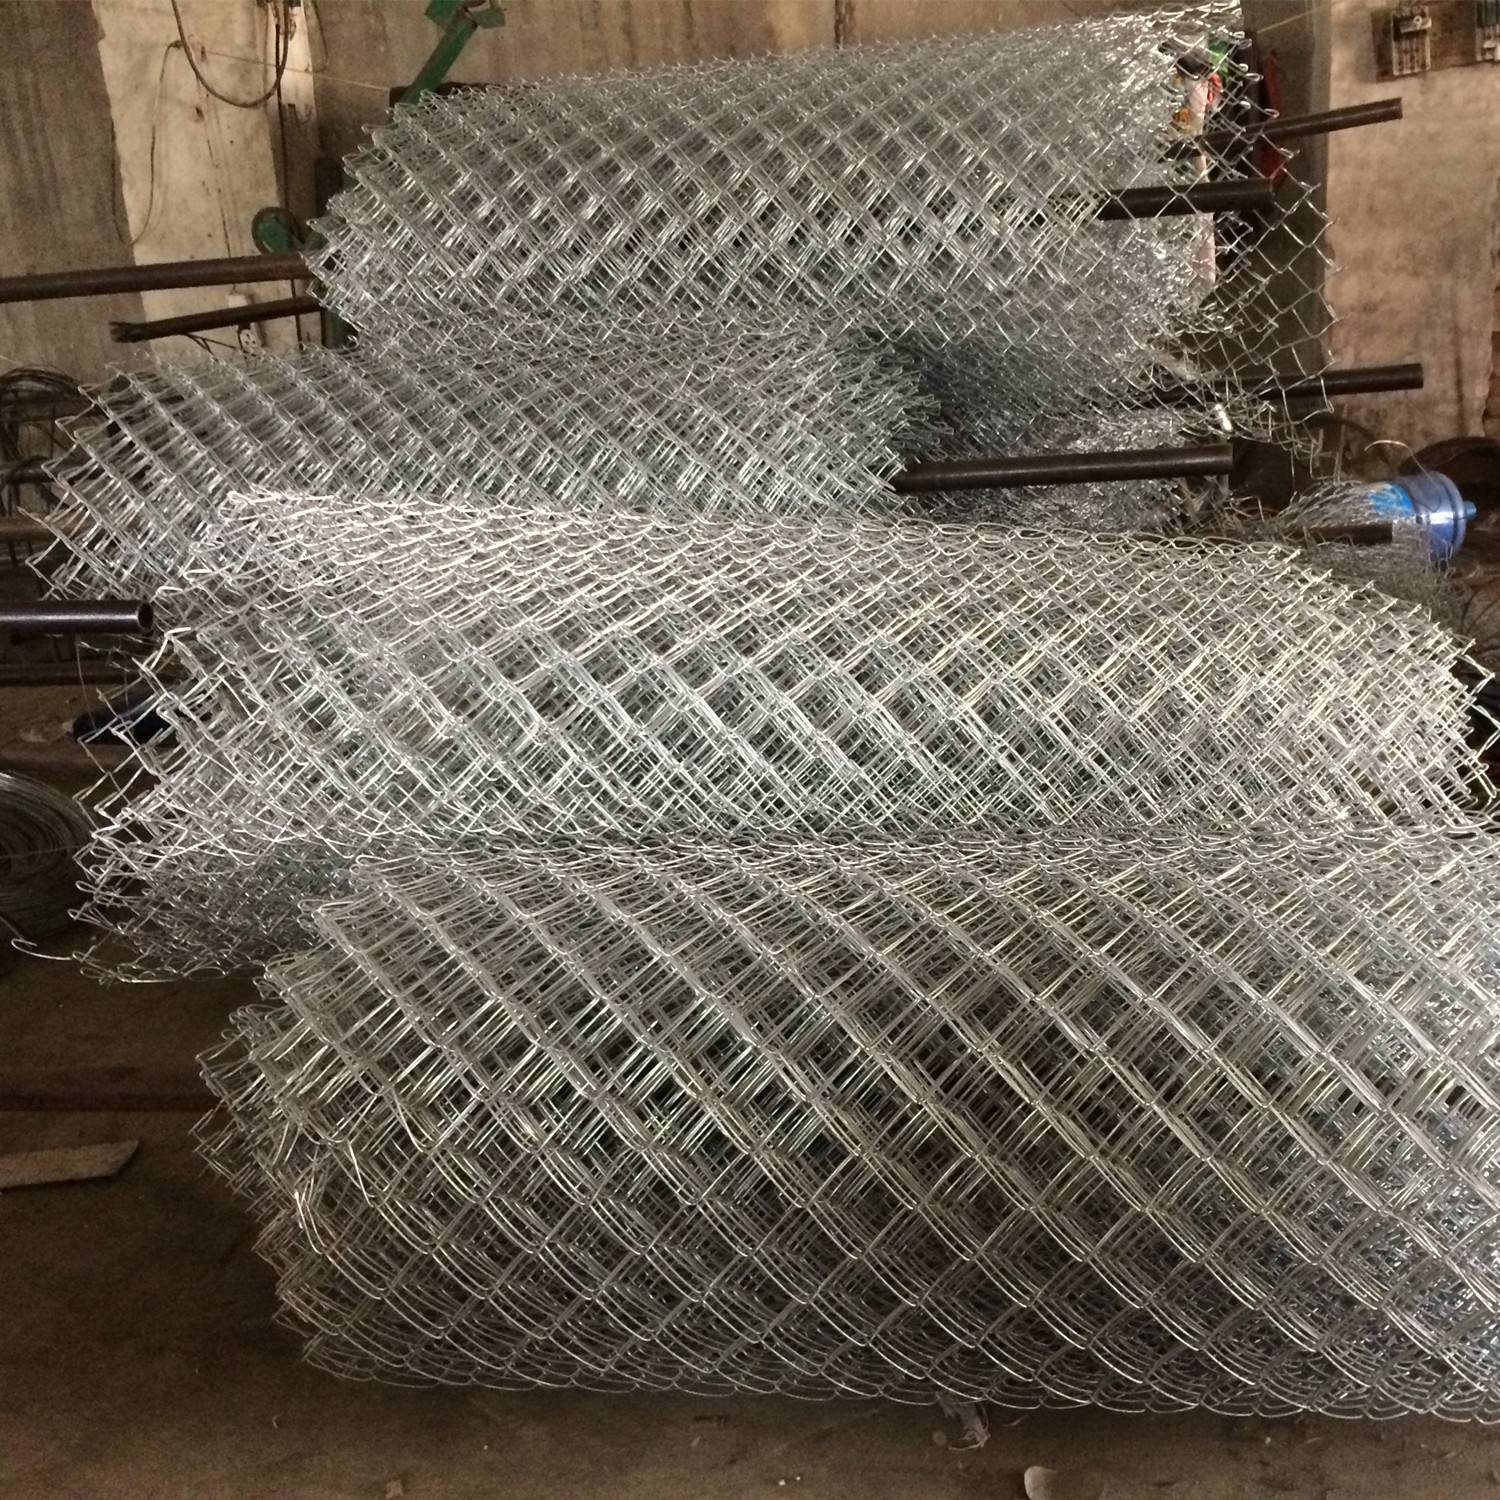 Wholesale Dealers of Vinyl Coated Wire Mesh Fence - High Zinc Coated 200g / SQM Galvanized Chain Link Fencing for Residential – Tian Yilong